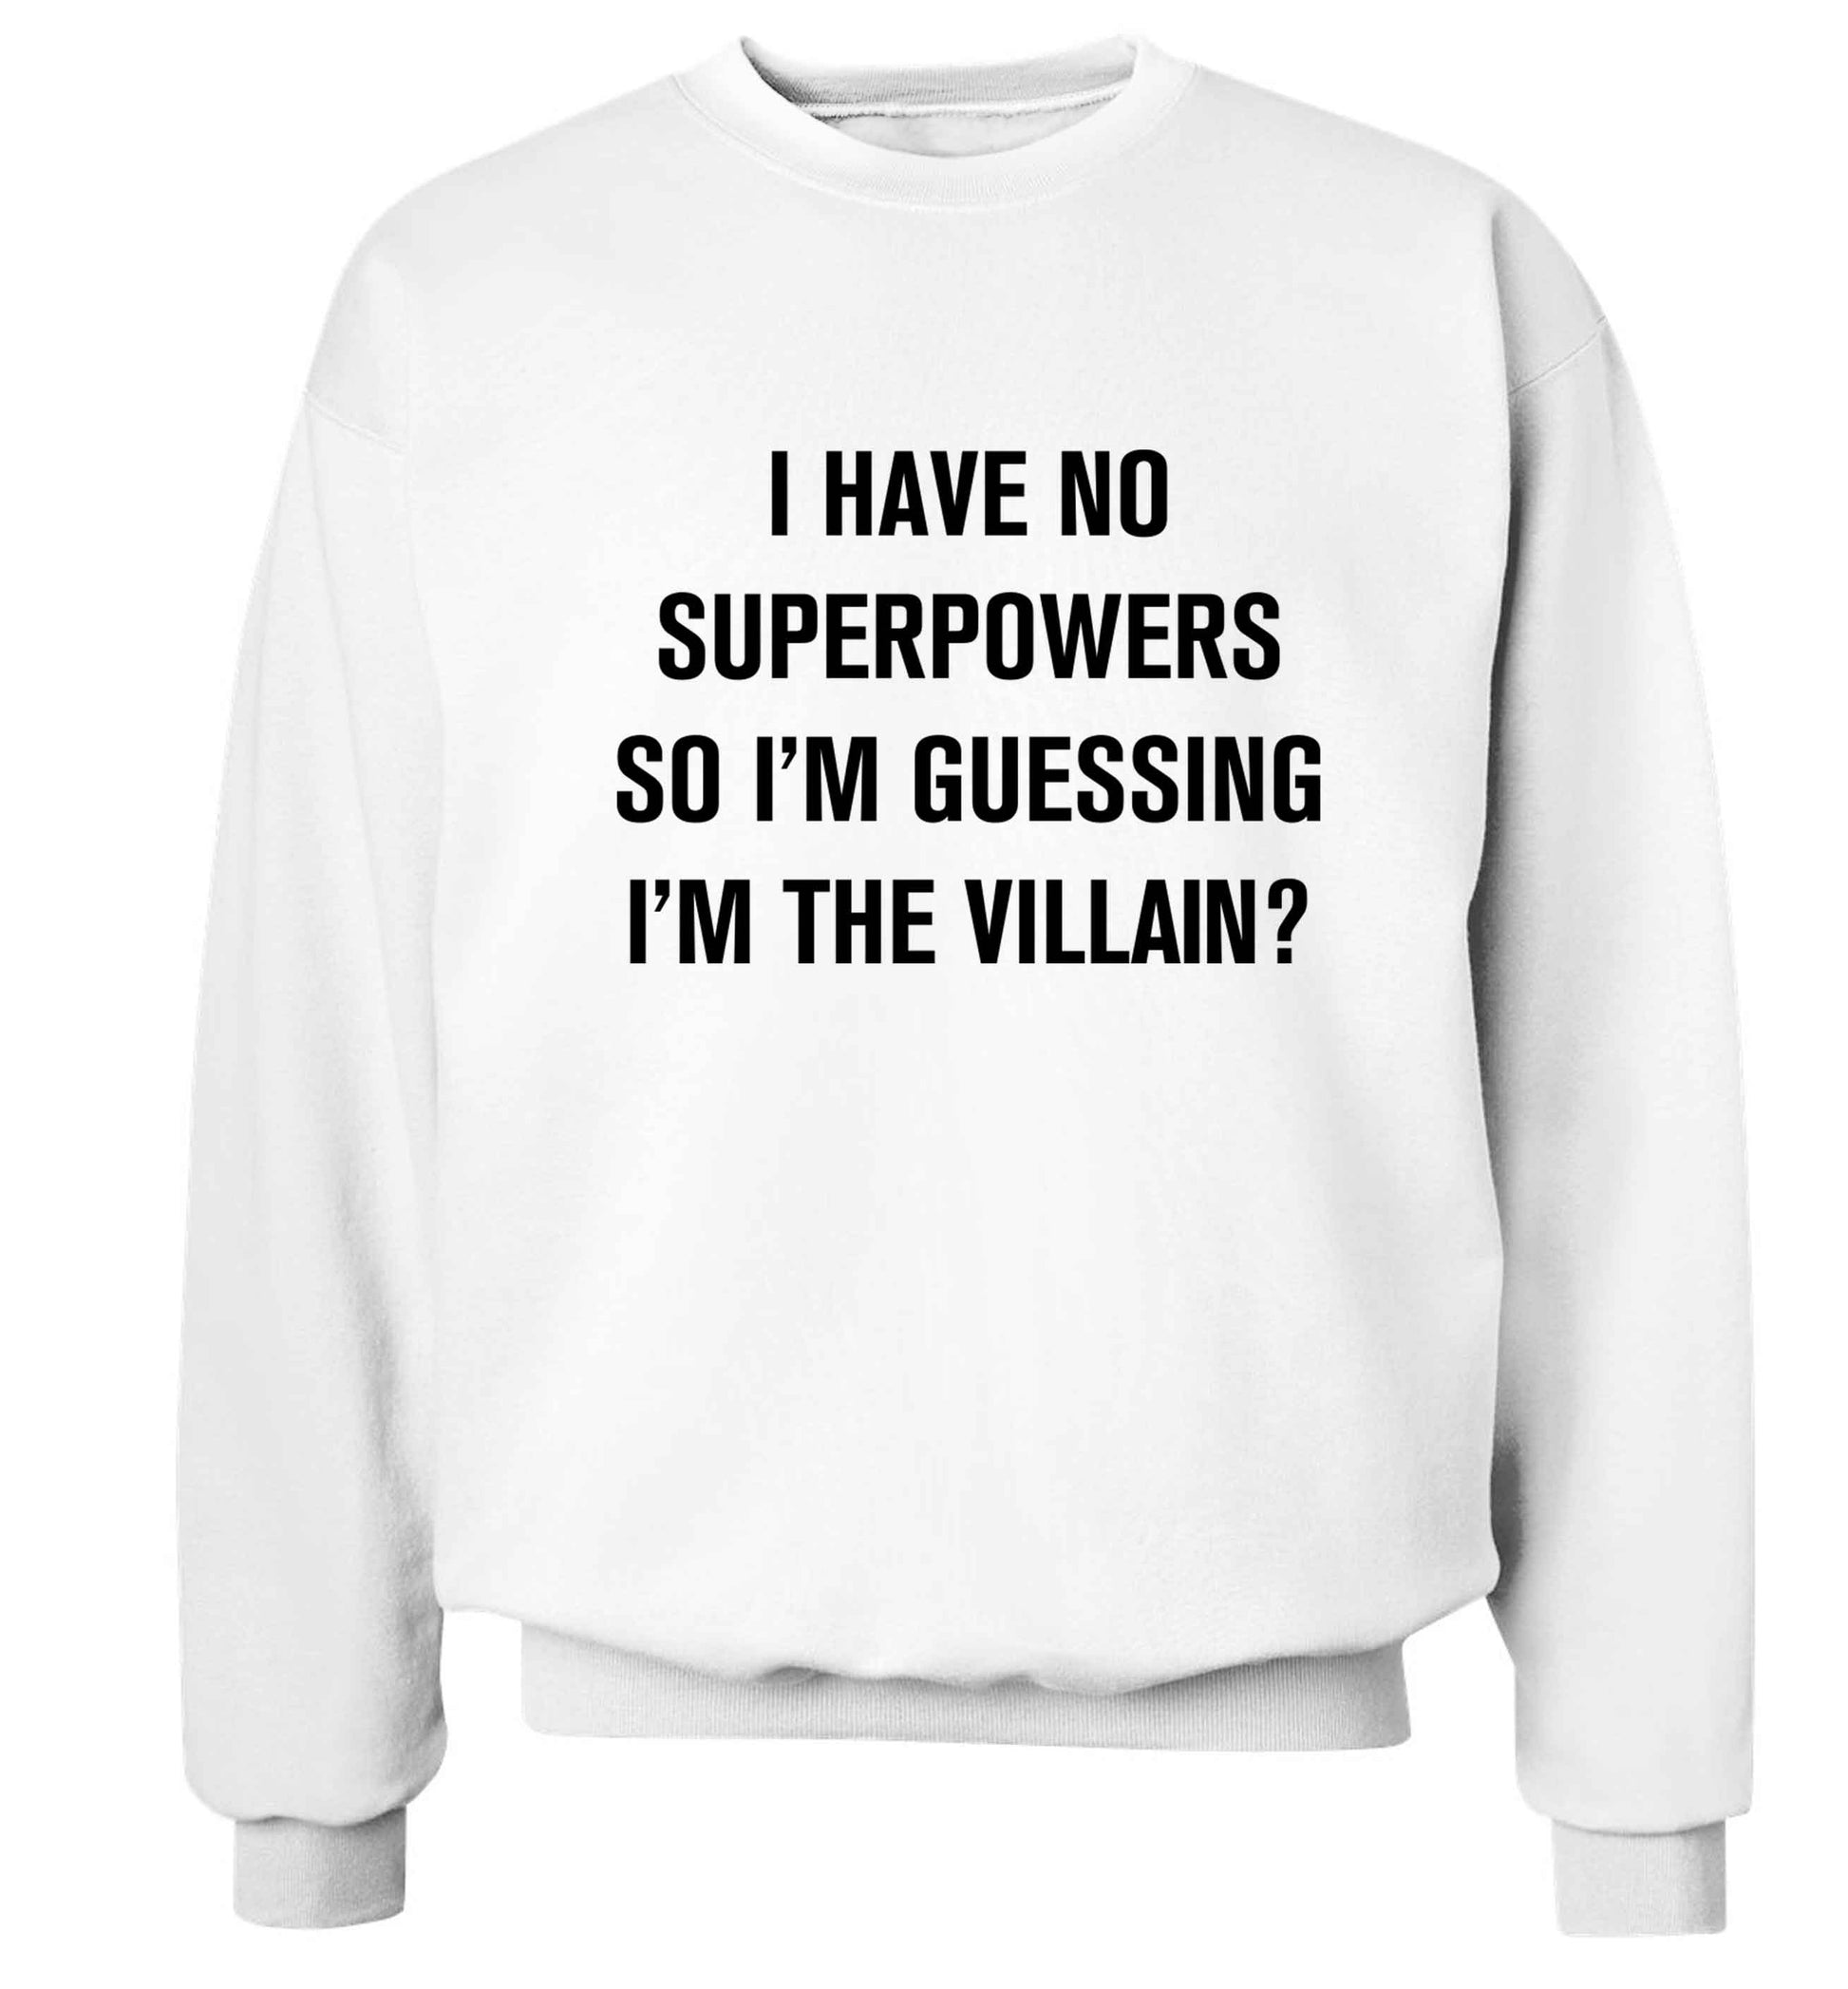 I have no superpowers so I'm guessing I'm the villain? Adult's unisex white Sweater 2XL